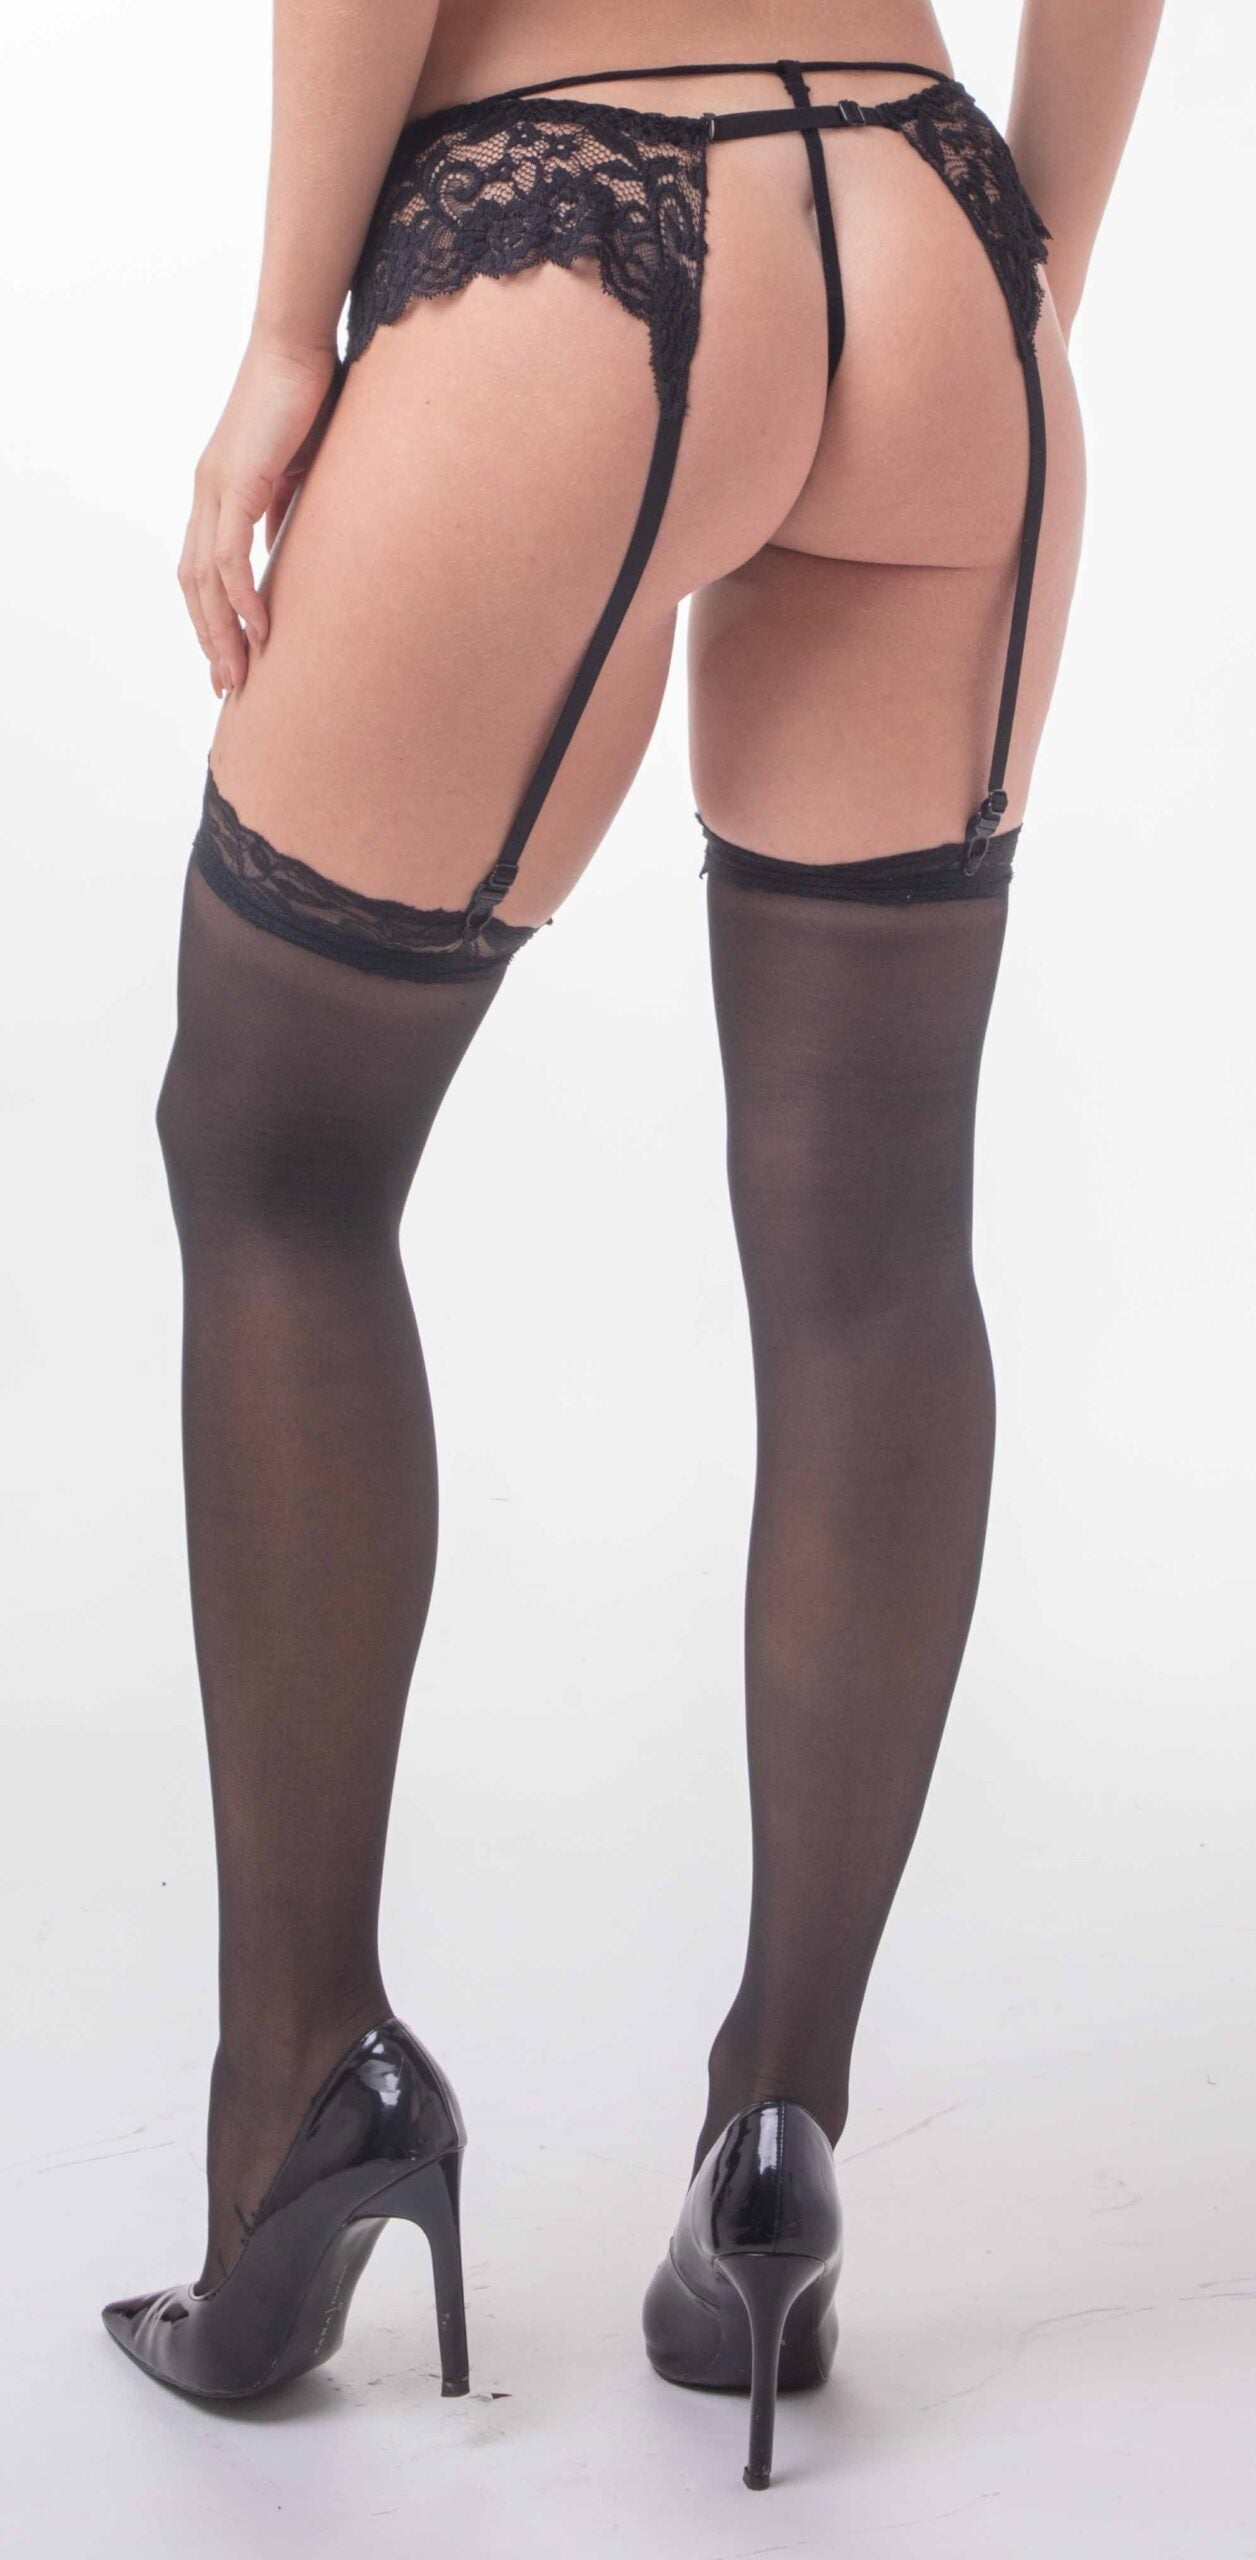 SEDUCTIVE LACE GARTER BELT WITH STOCKINGS